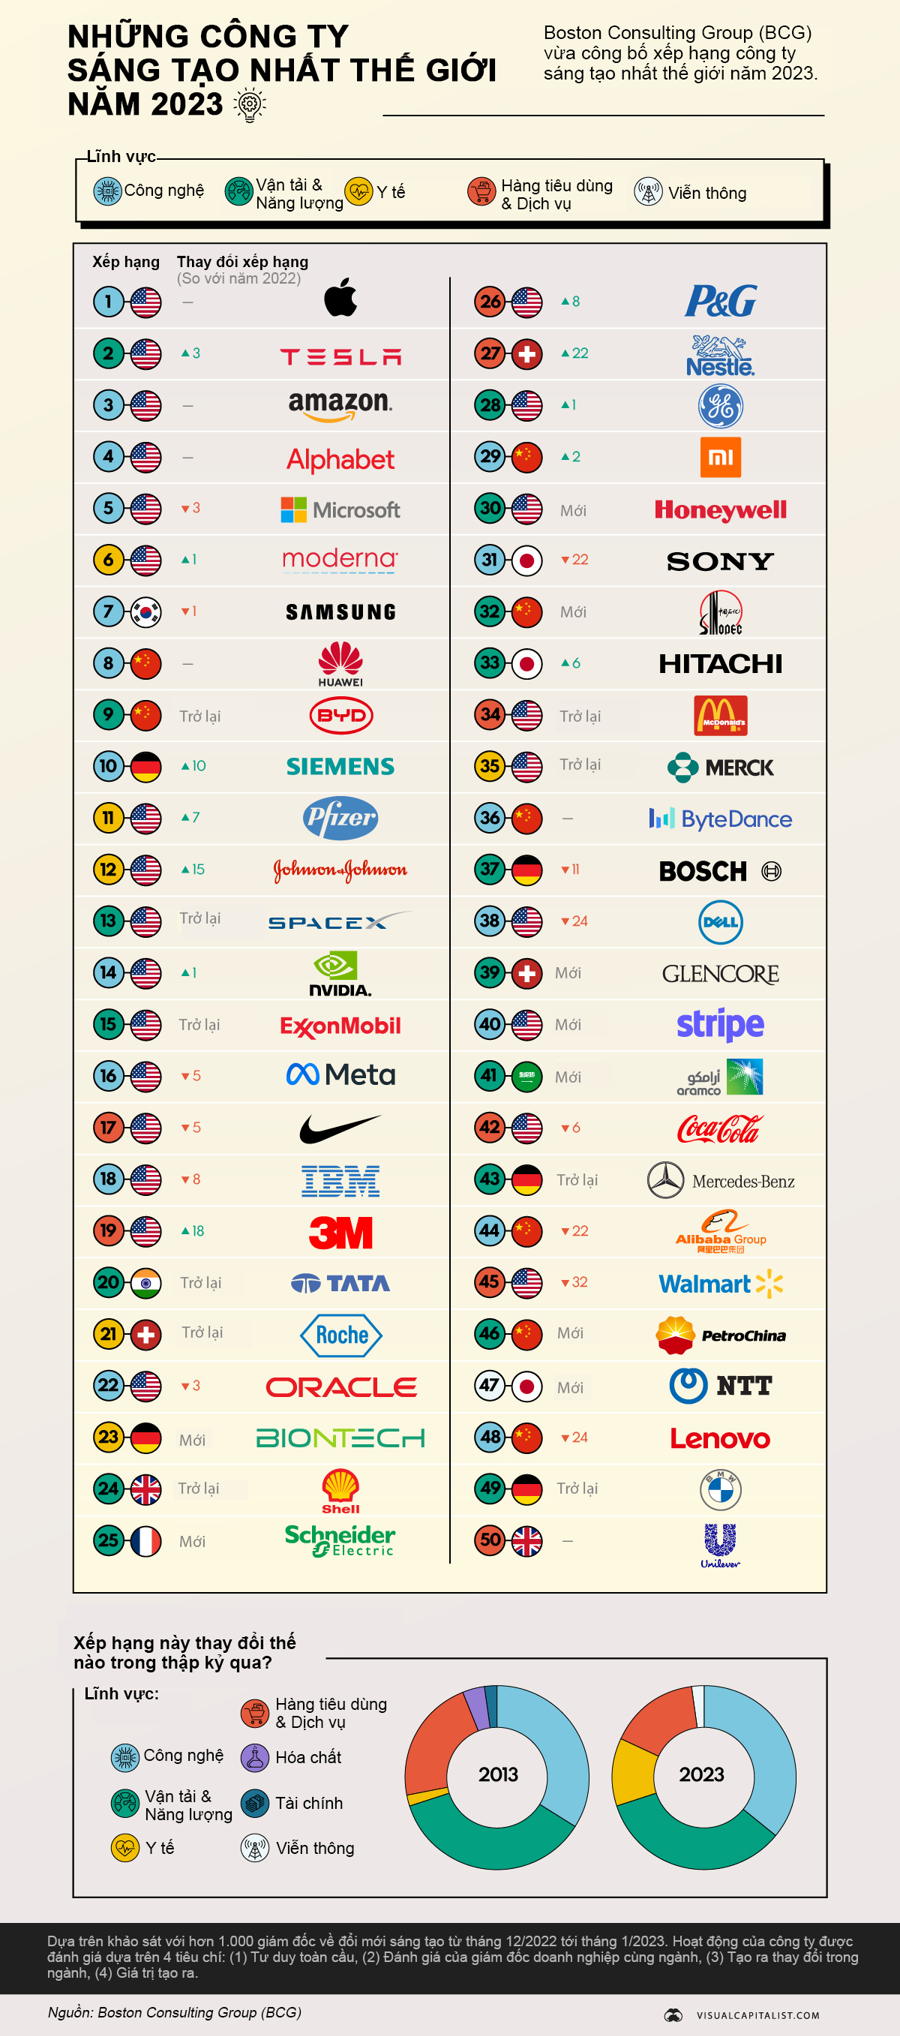 most-innovative-companies-2023-main.png